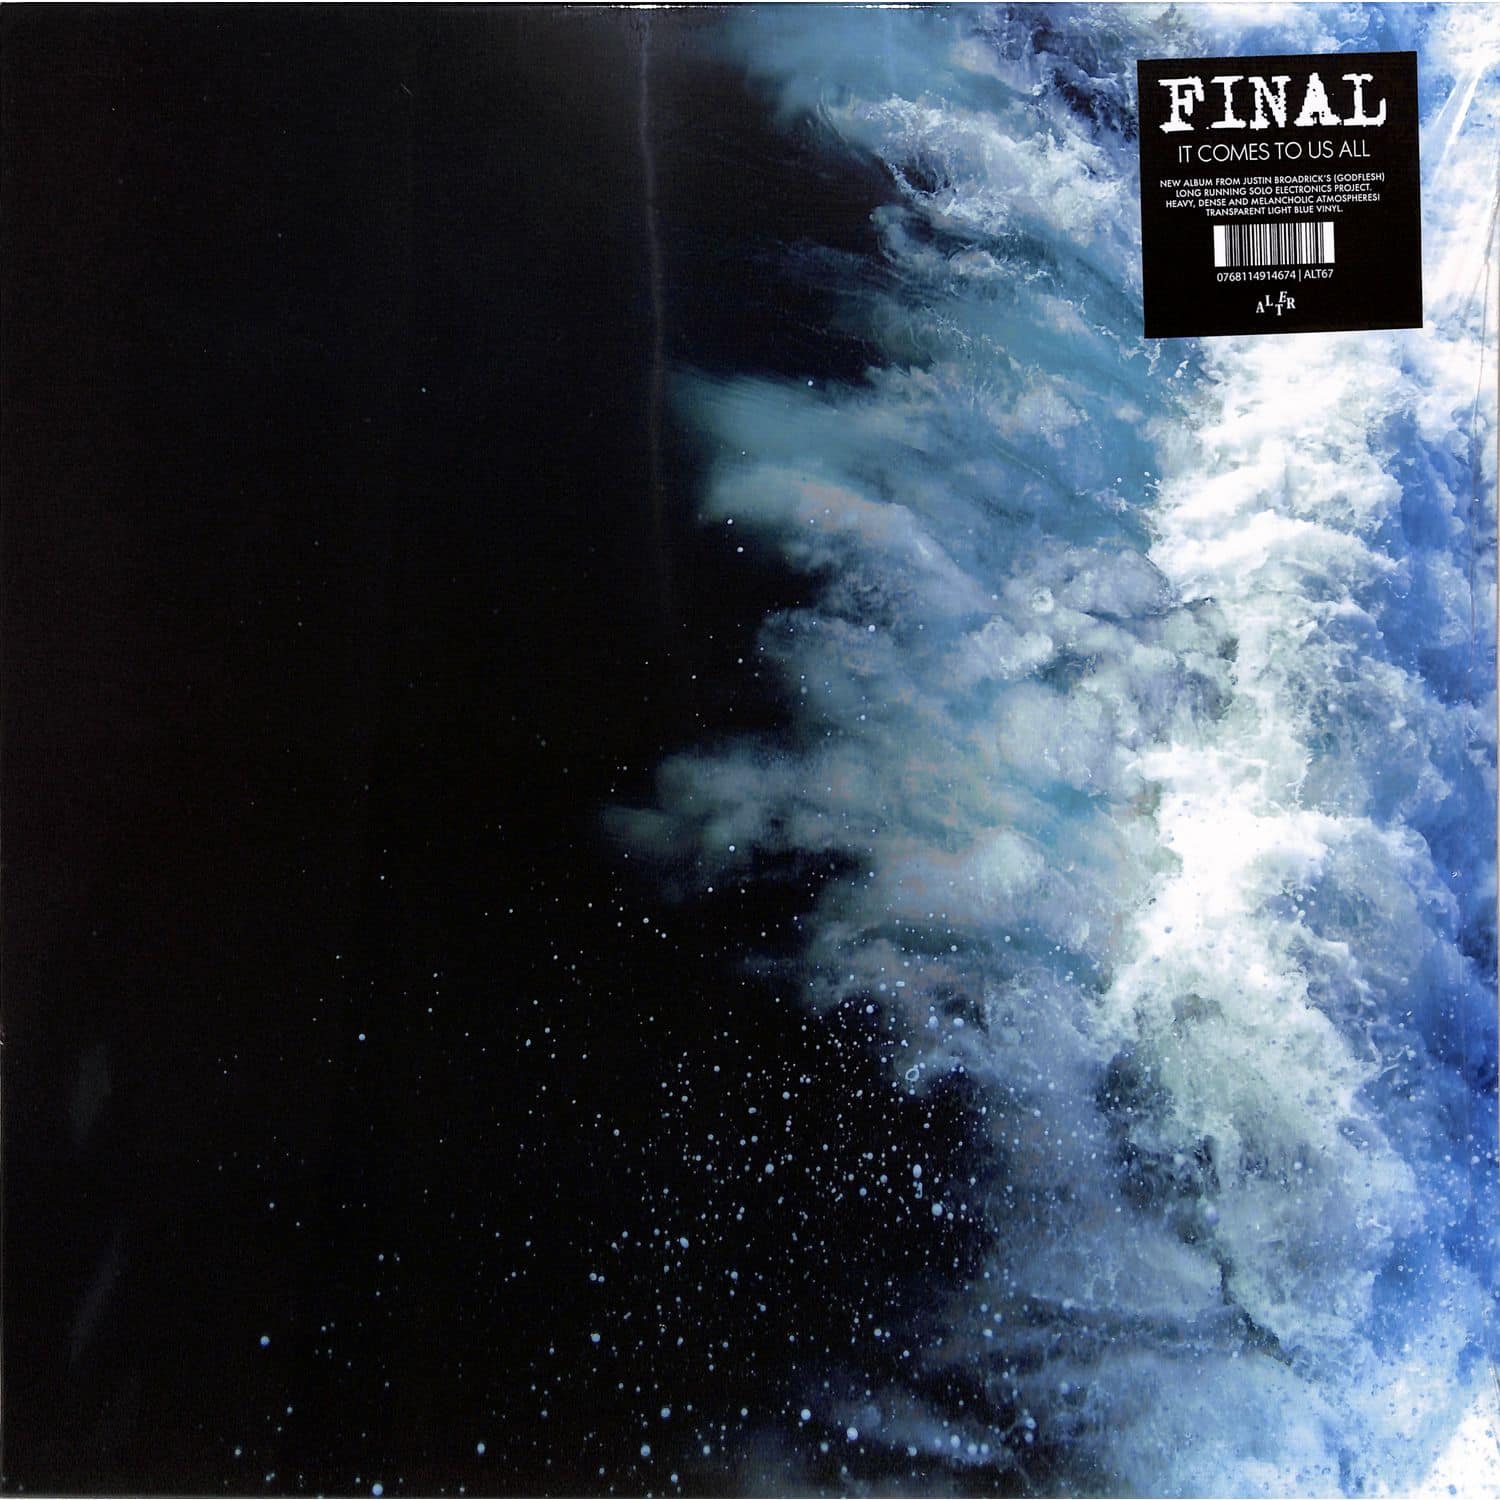 Final - IT COMES TO US ALL 